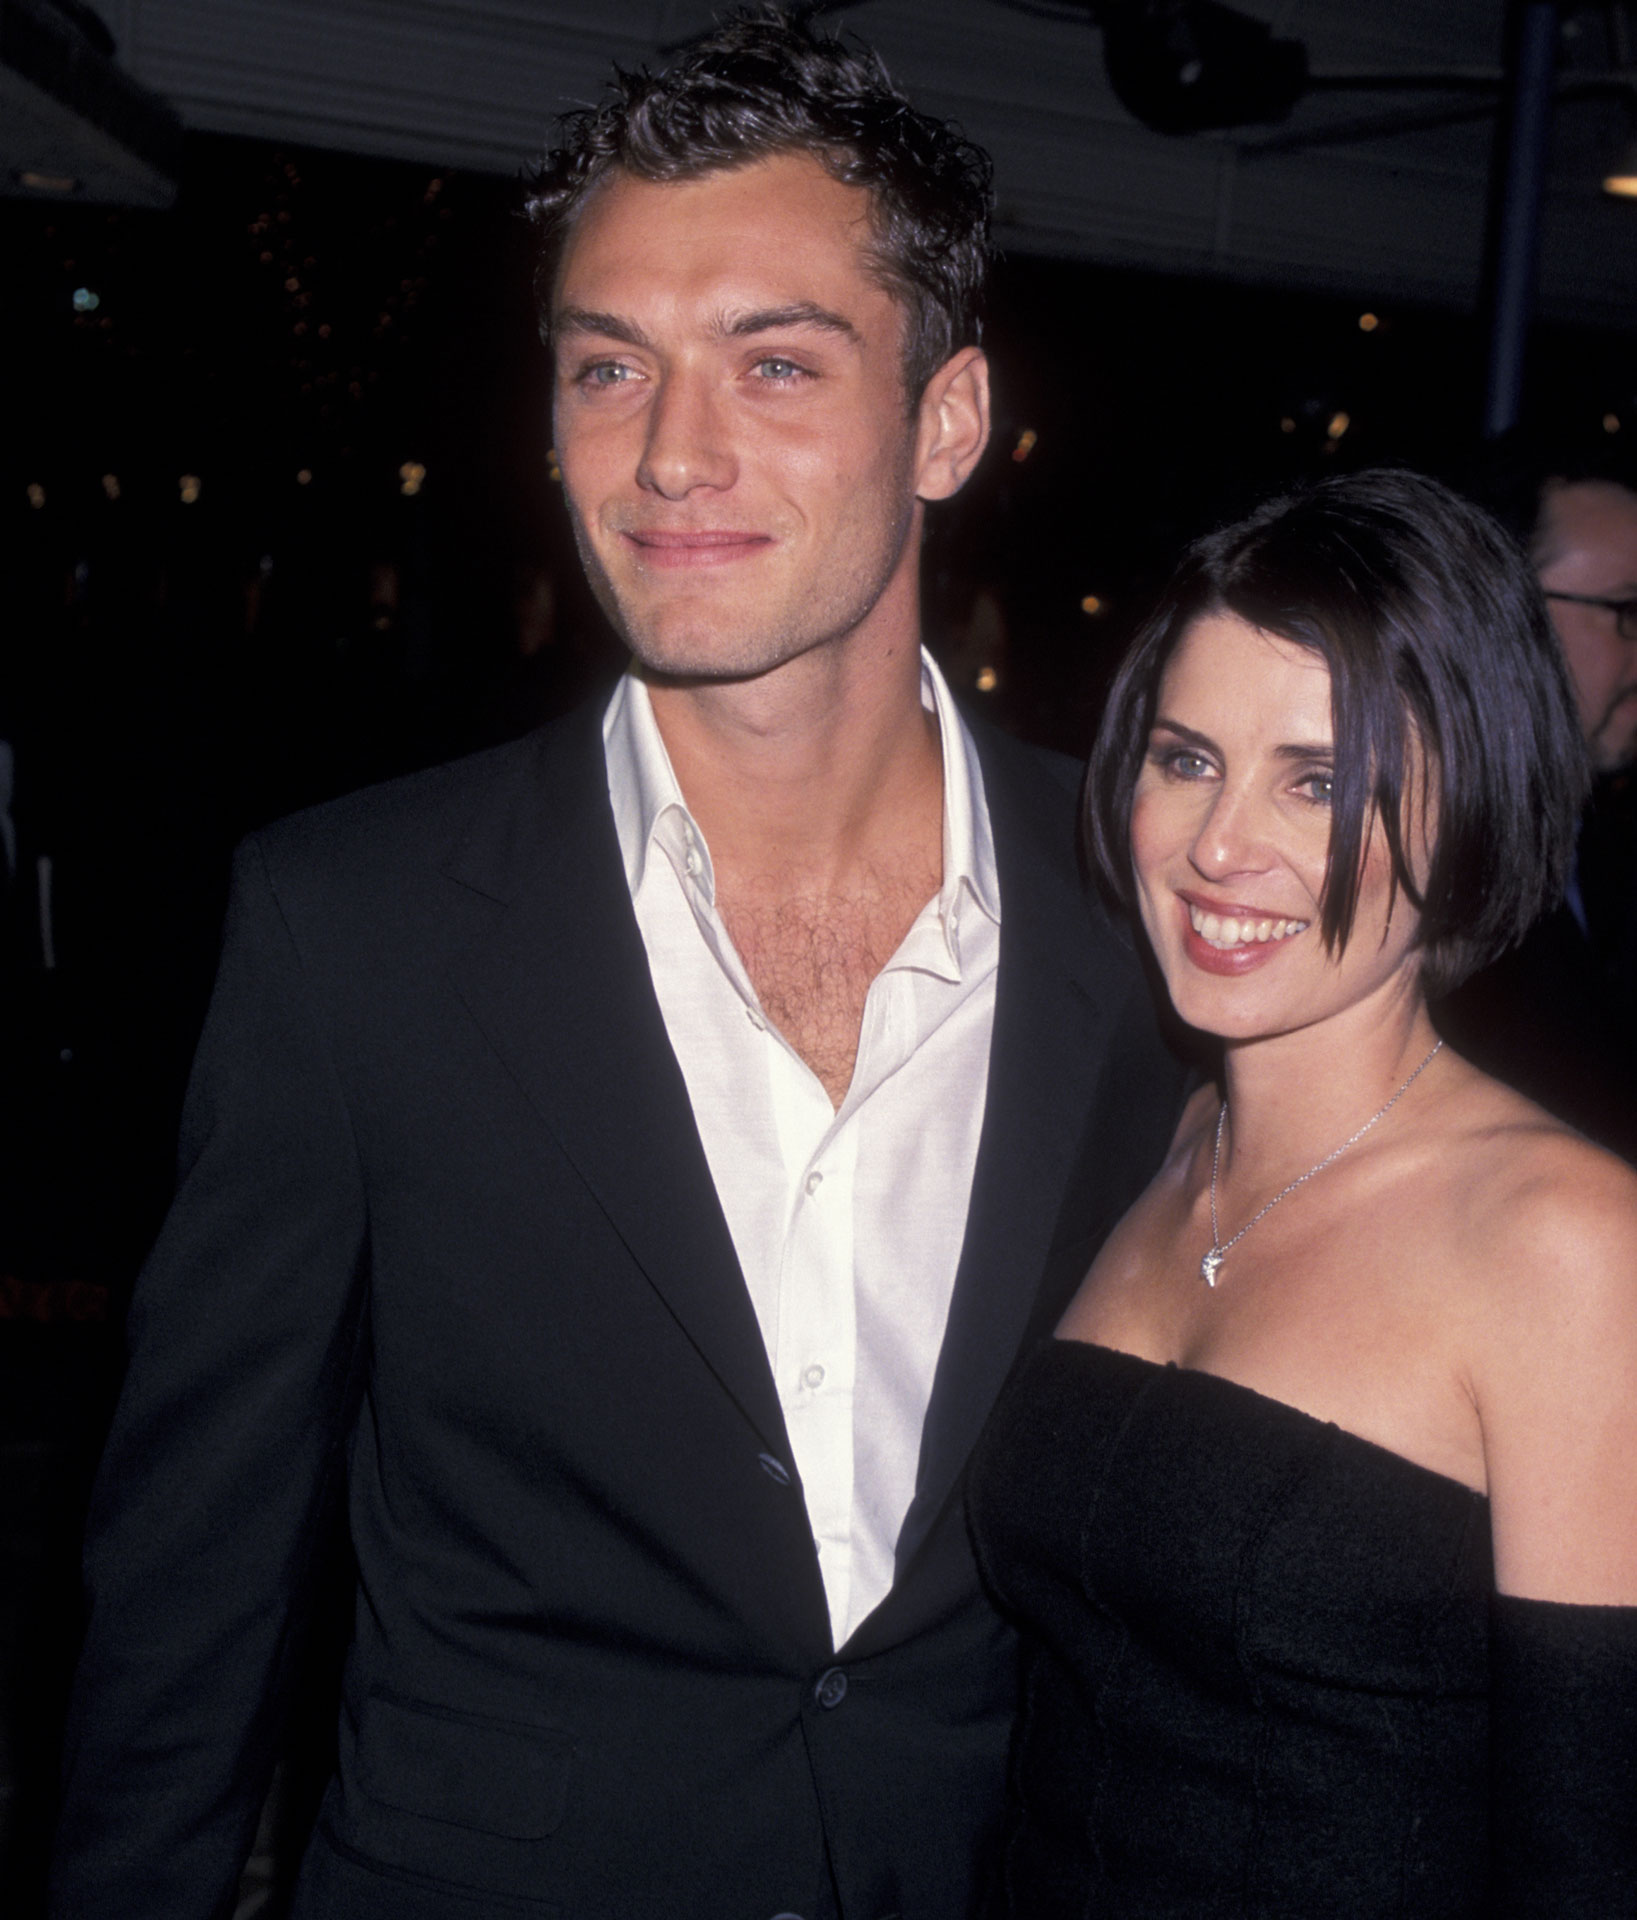 Jude Law and Sadie Frost